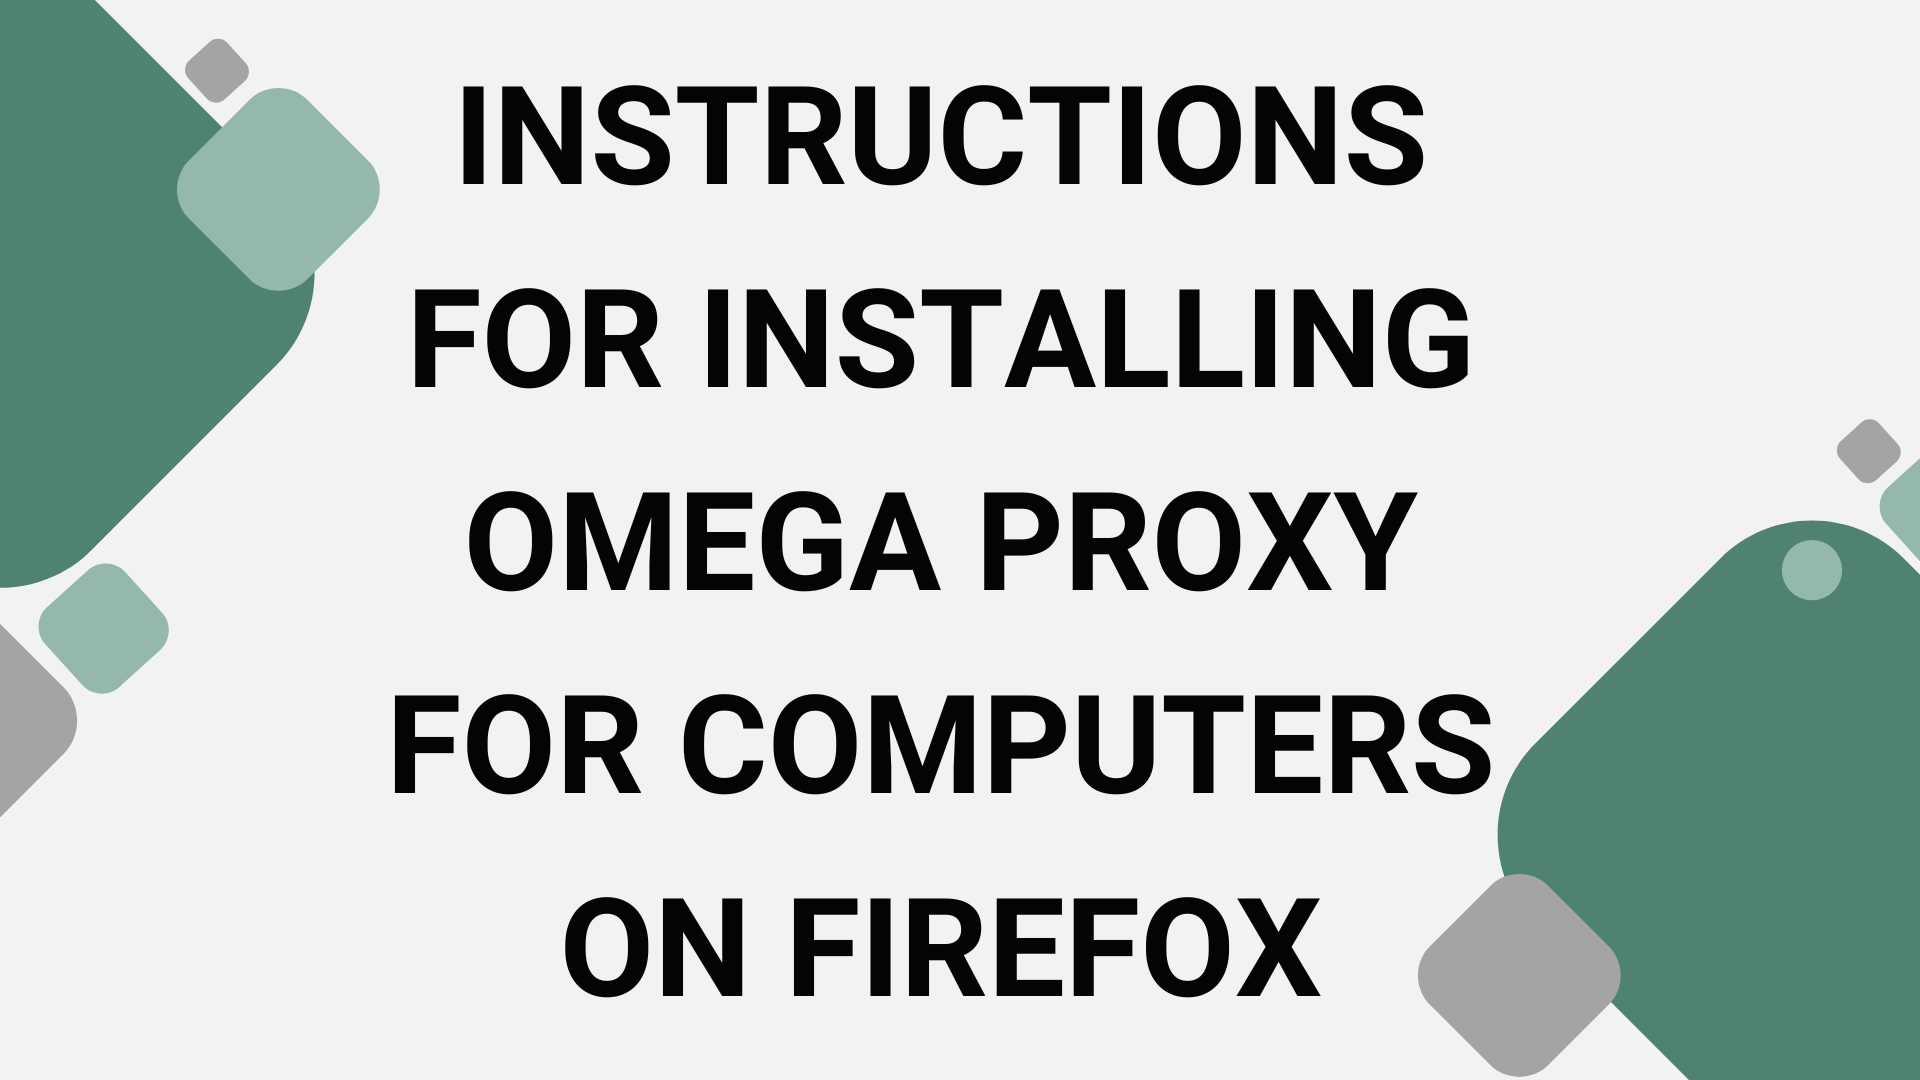 Instructions for installing Omega Proxy for computers on Firefox